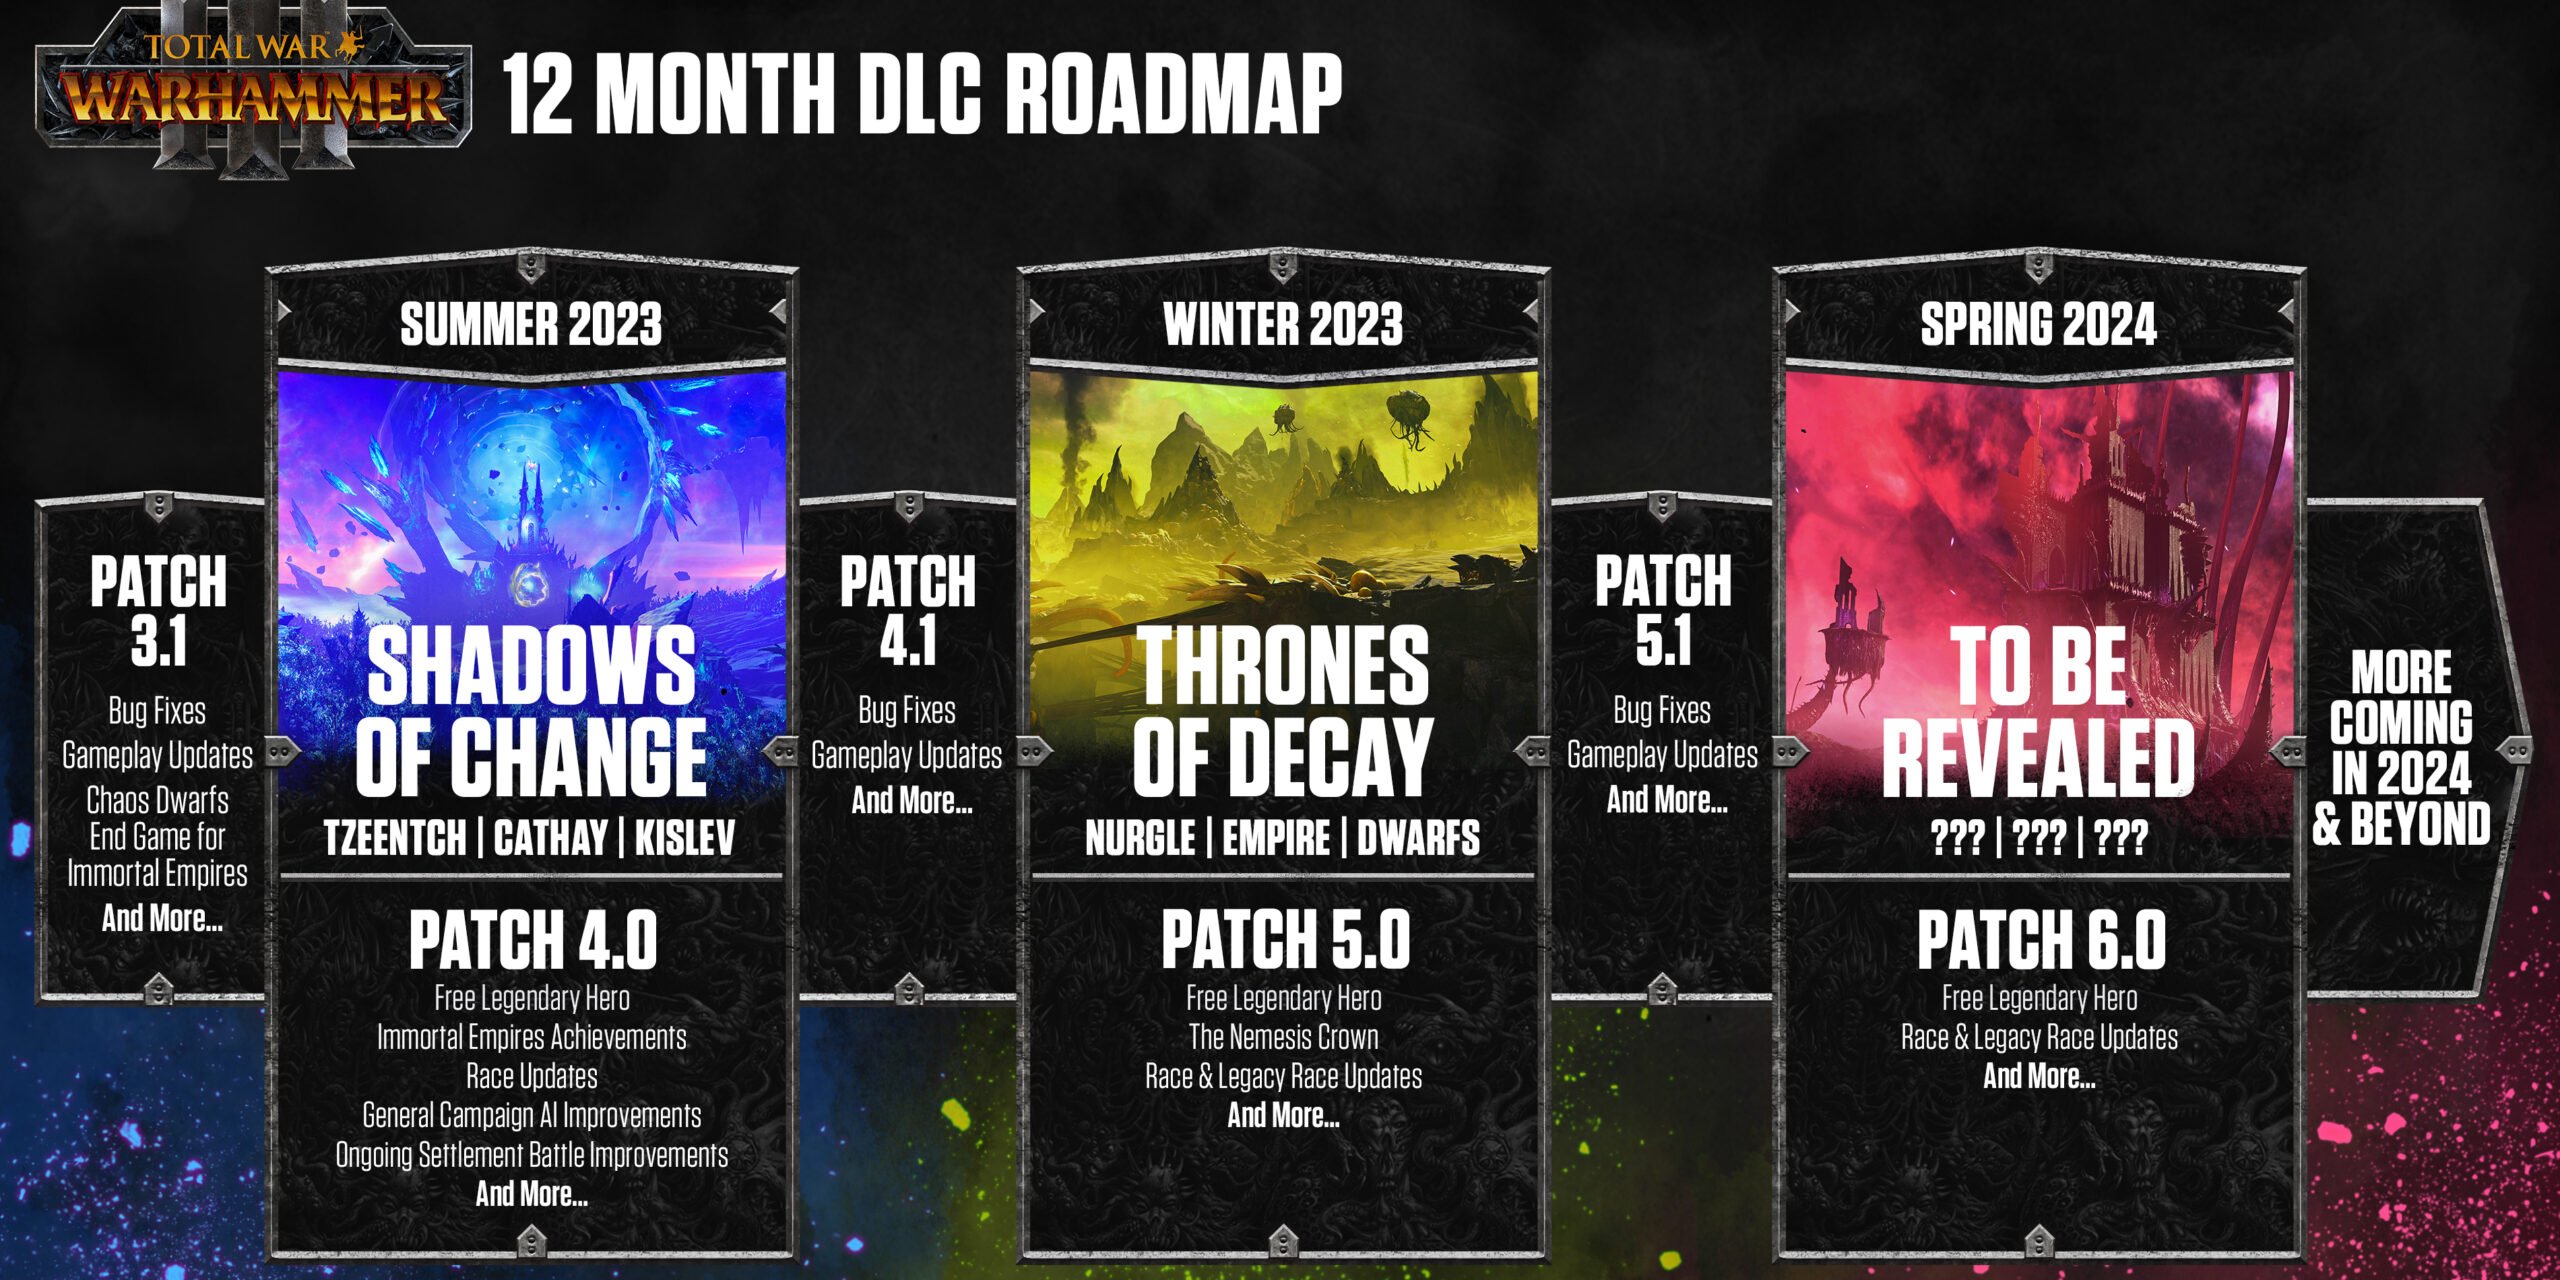 Total War Warhammer 3 Roadmap for 2023 and Beyond 2Game